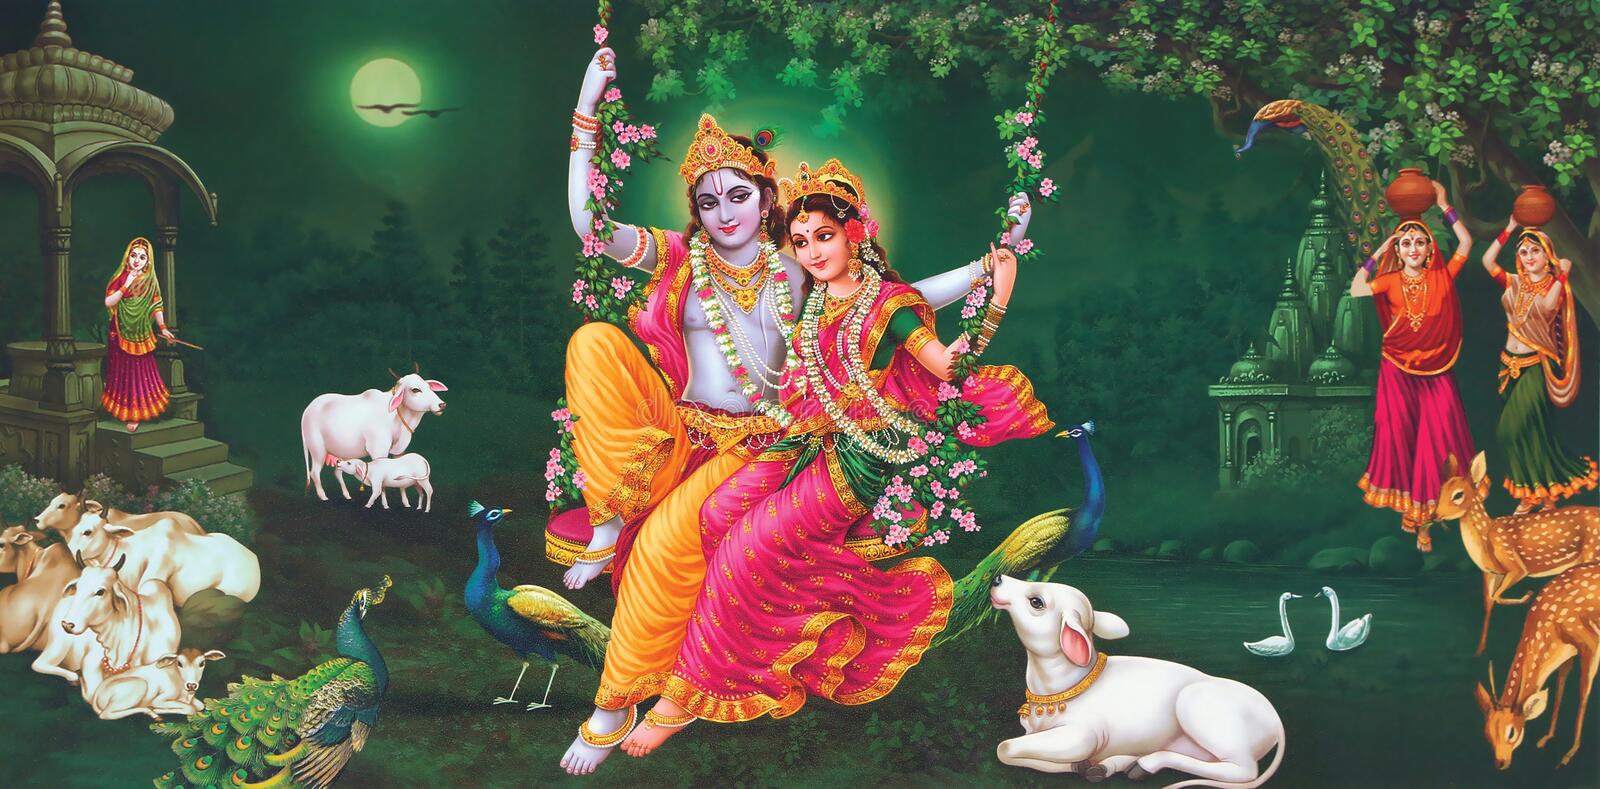 The message of love and compassion conveyed through Marble Radha Krishna Murti